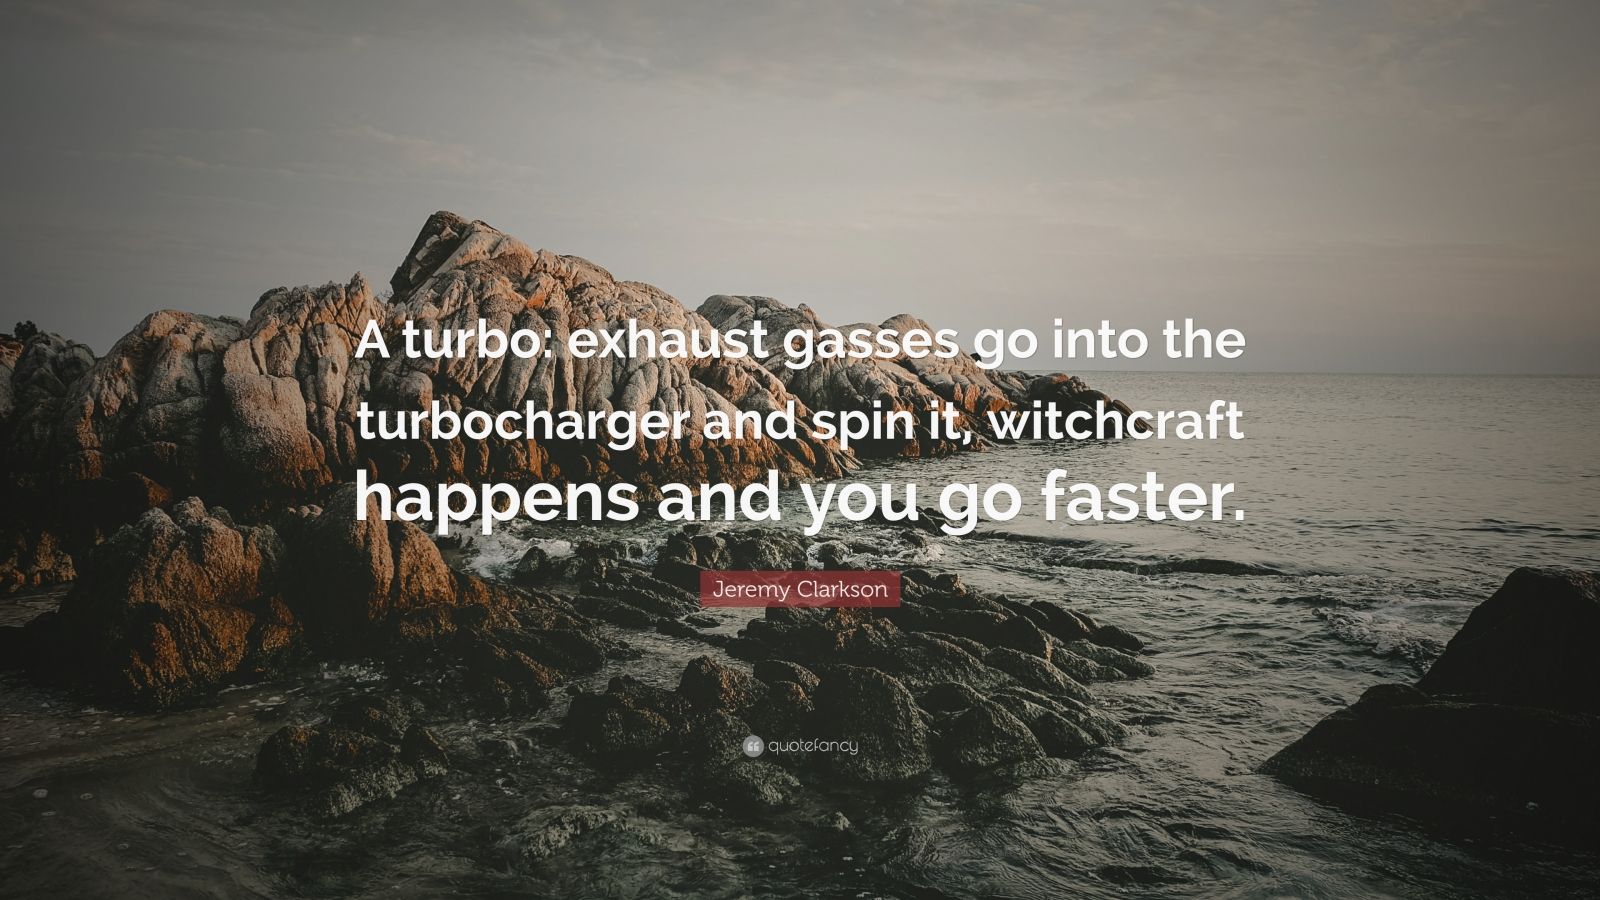 Jeremy Clarkson Quote: "A turbo: exhaust gasses go into the turbocharger and spin it, witchcraft ...